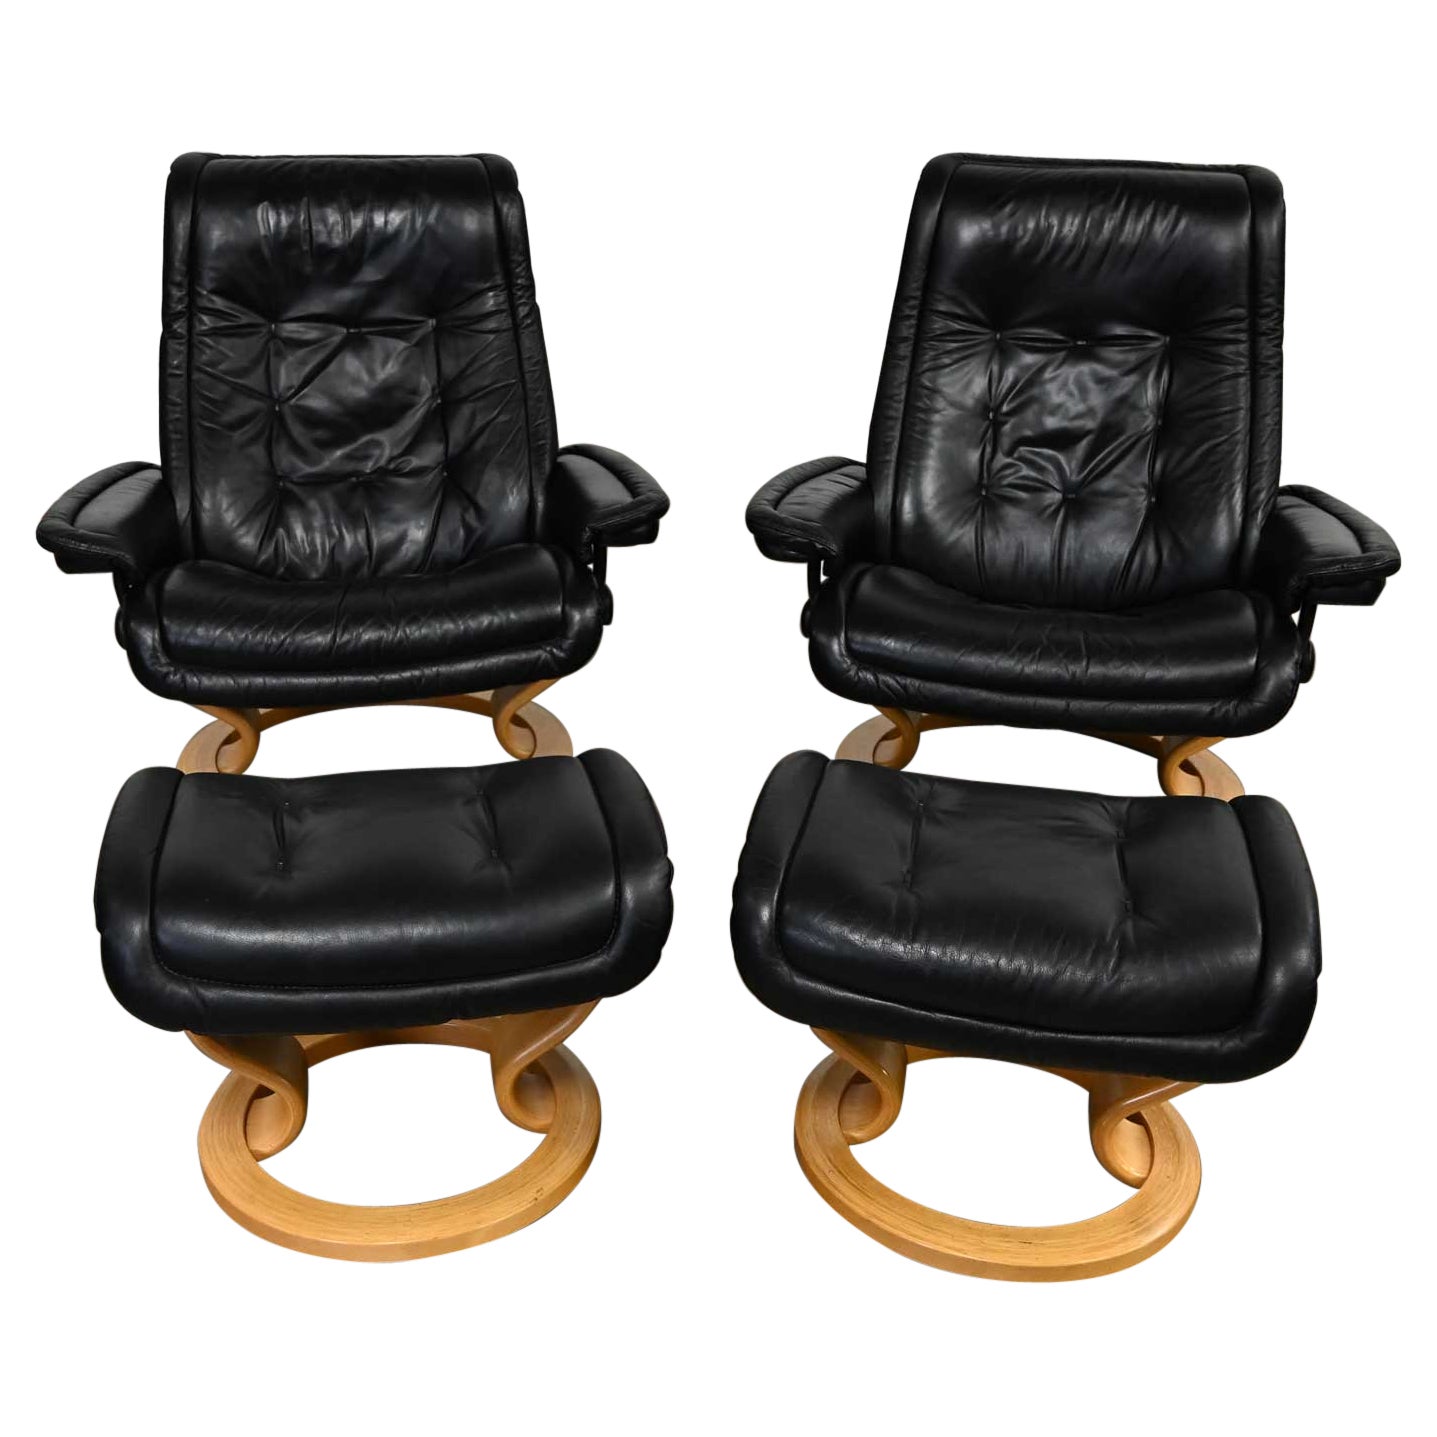 Pair Ekornes Stressless Royal Recliner Black Leather Lounge Chairs & Ottomans